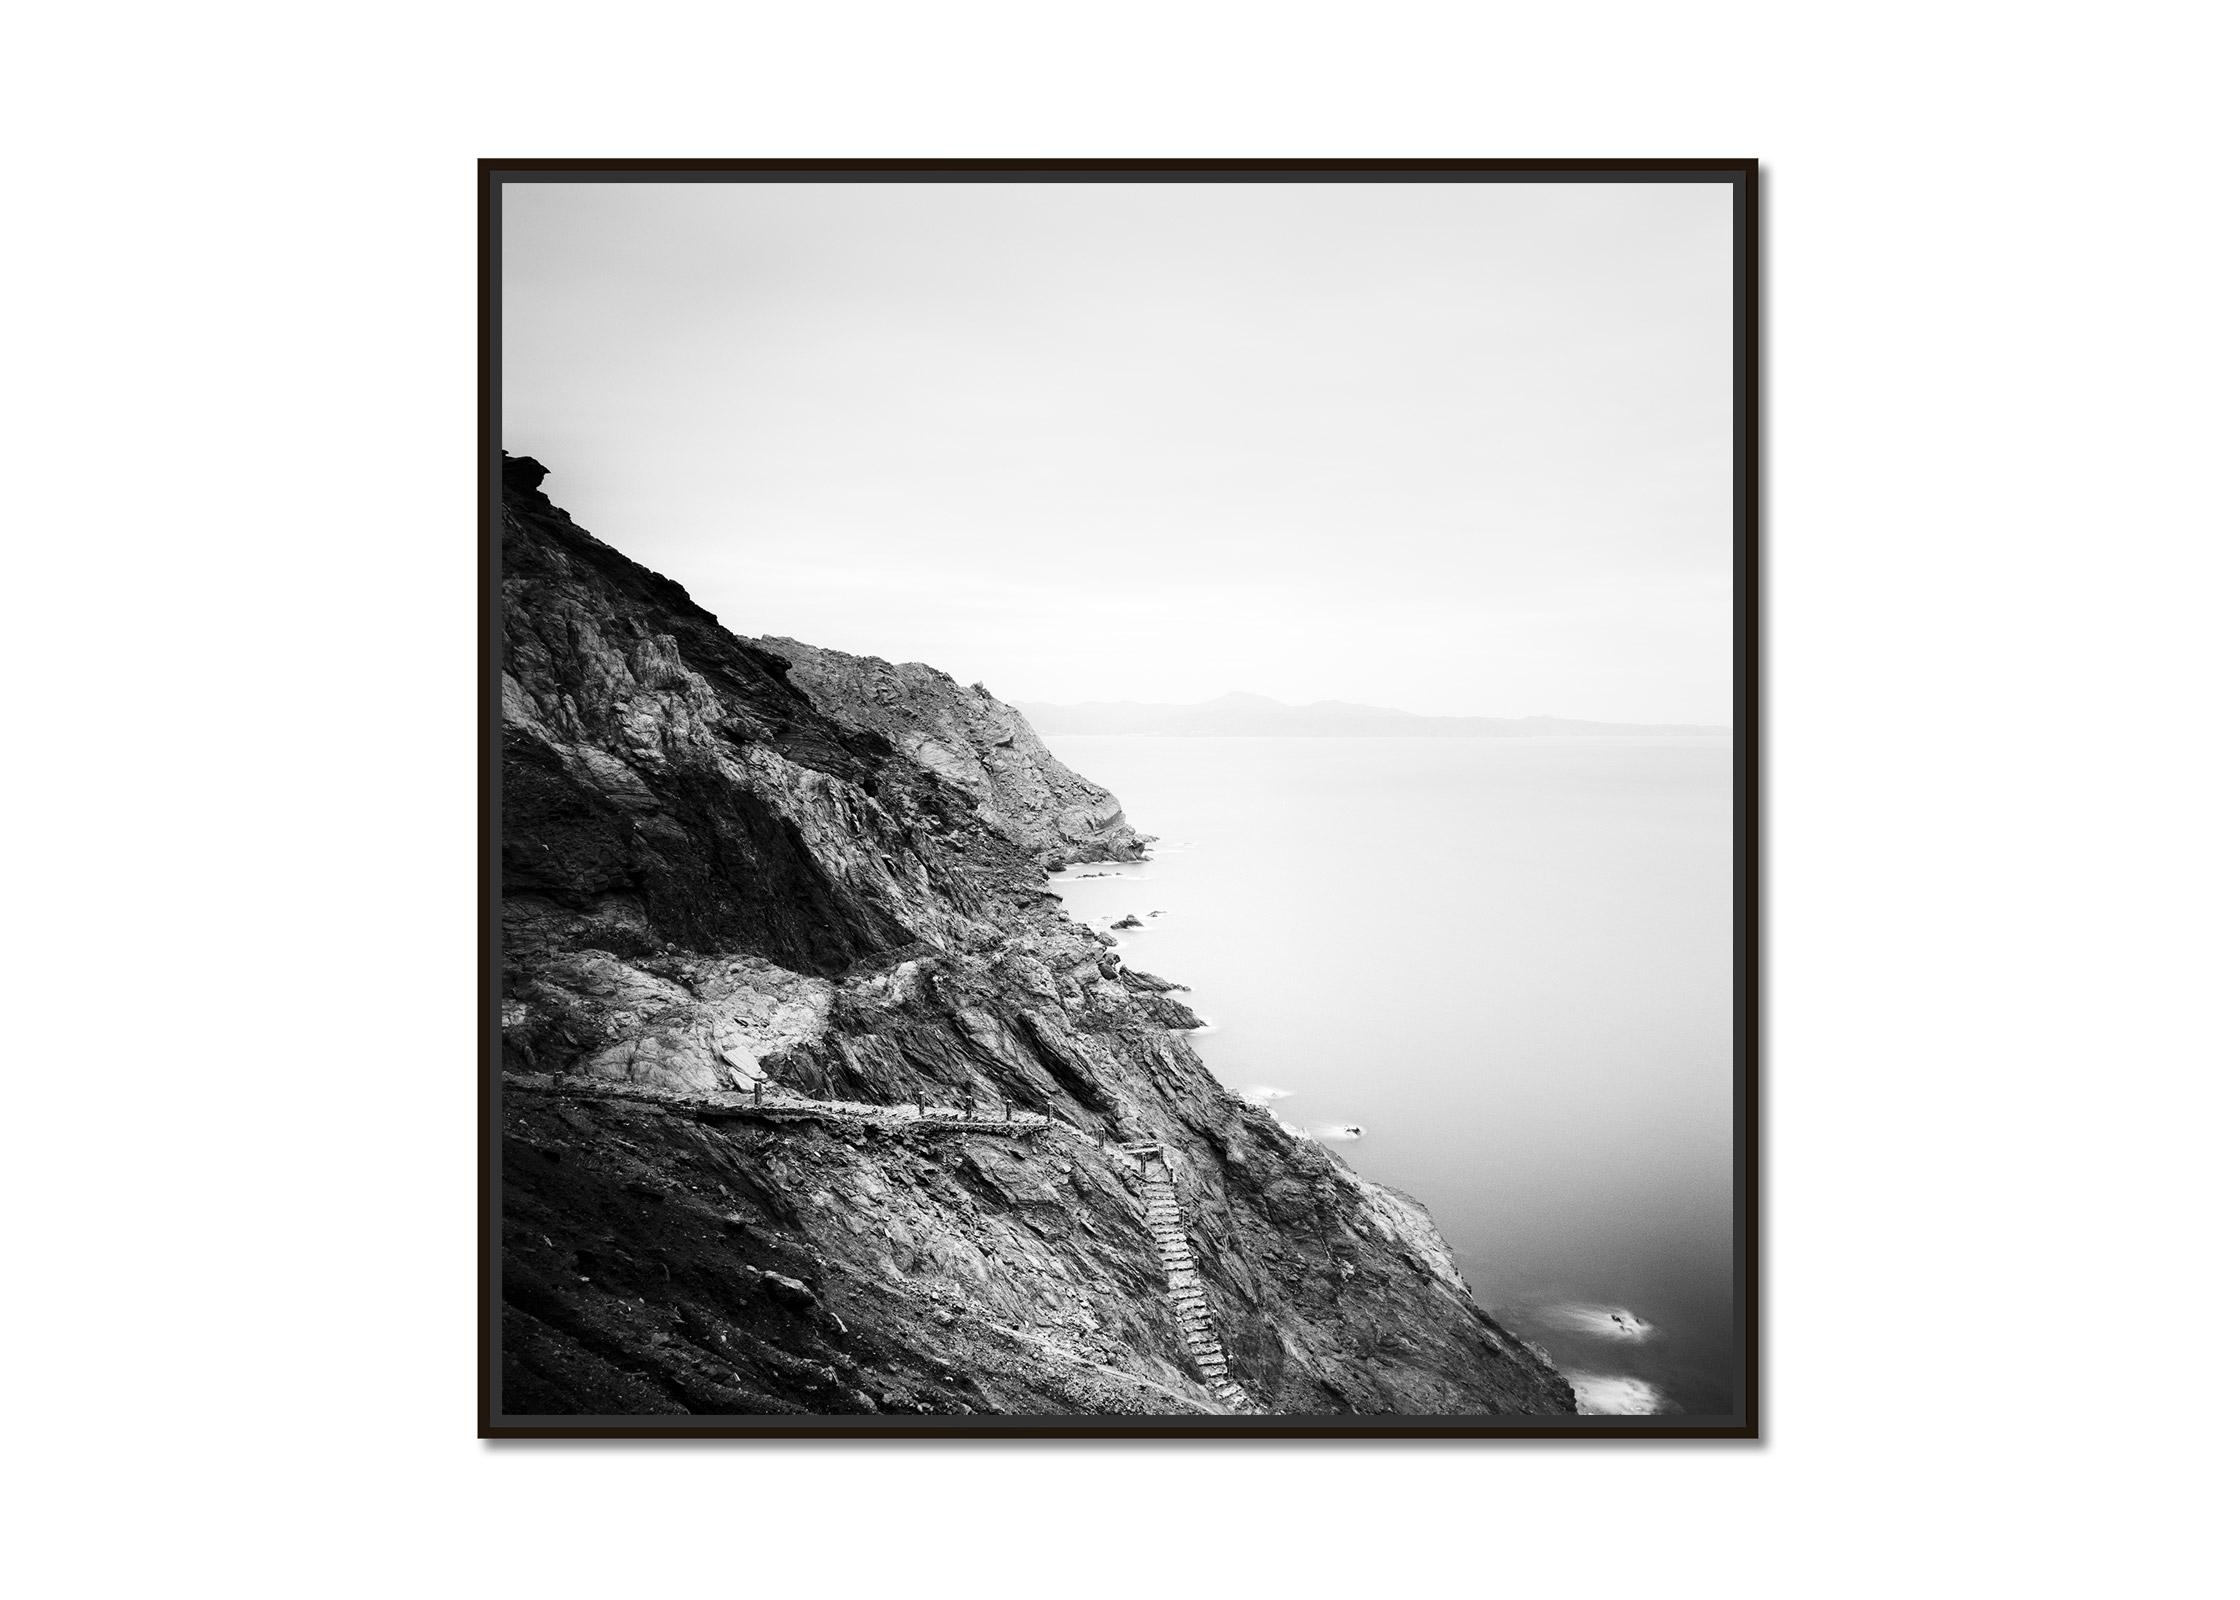 Stairway to Beach, Portugal, fine art black and white photography, landscapes   - Photograph by Gerald Berghammer, Ina Forstinger